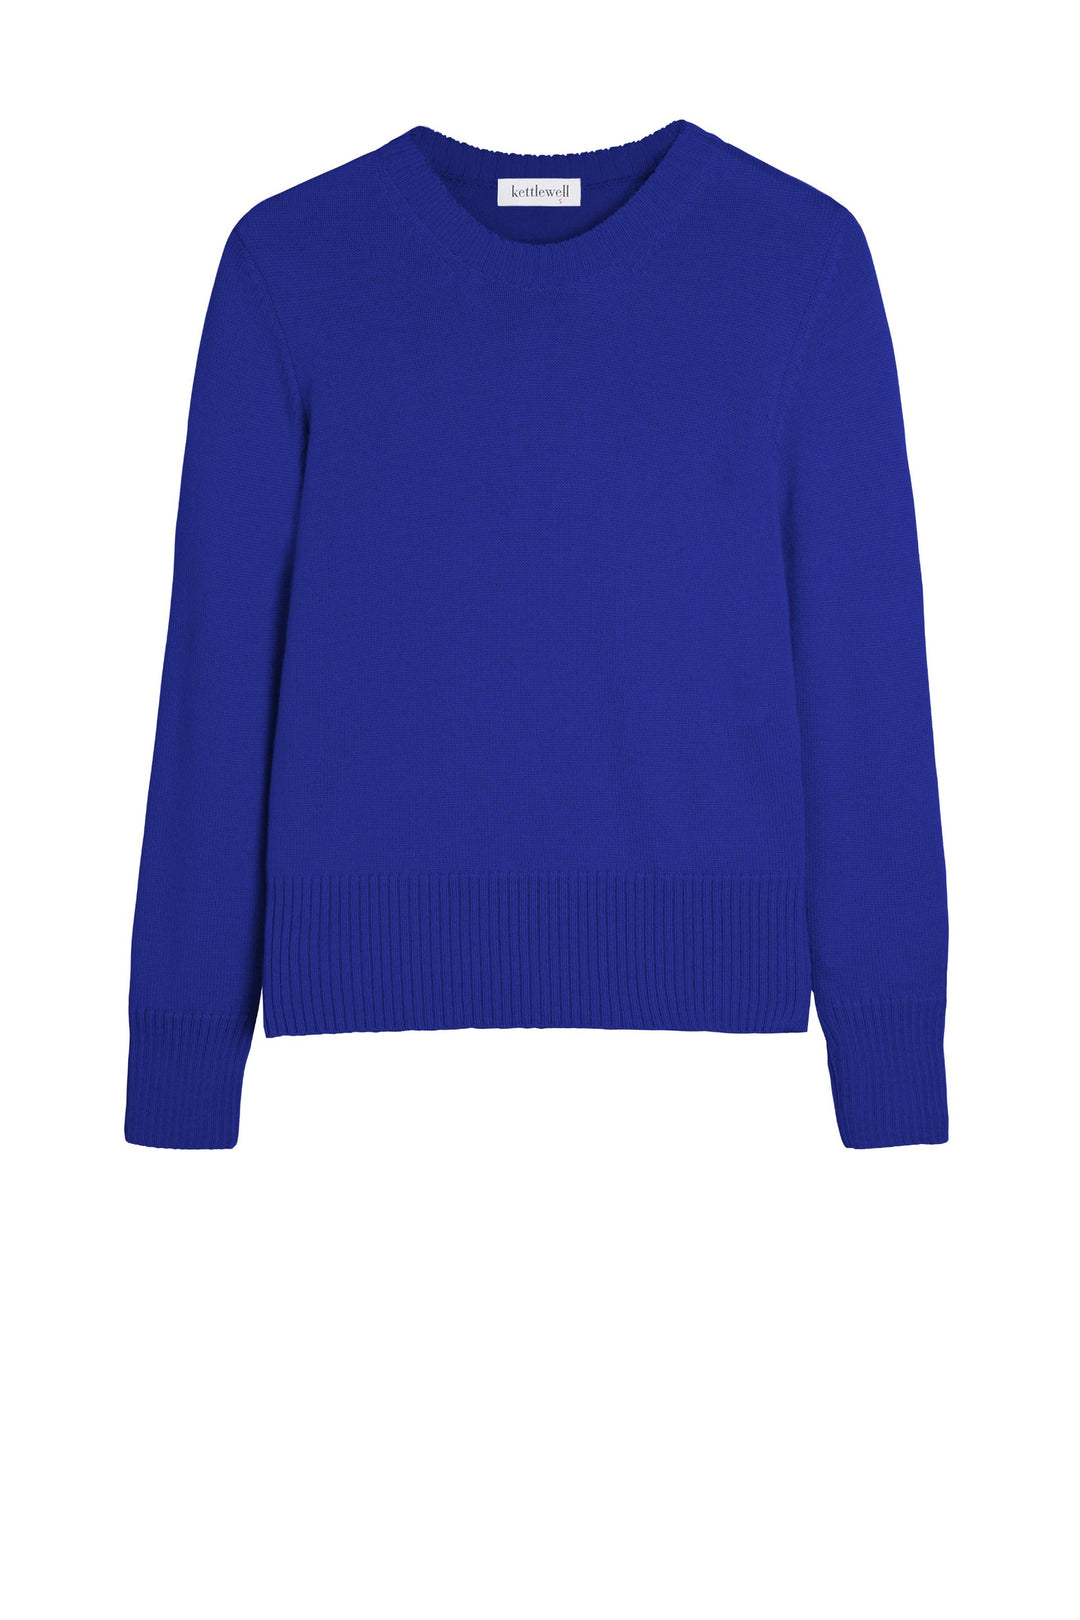 Kettlewell Connie Sweater - Sapphire